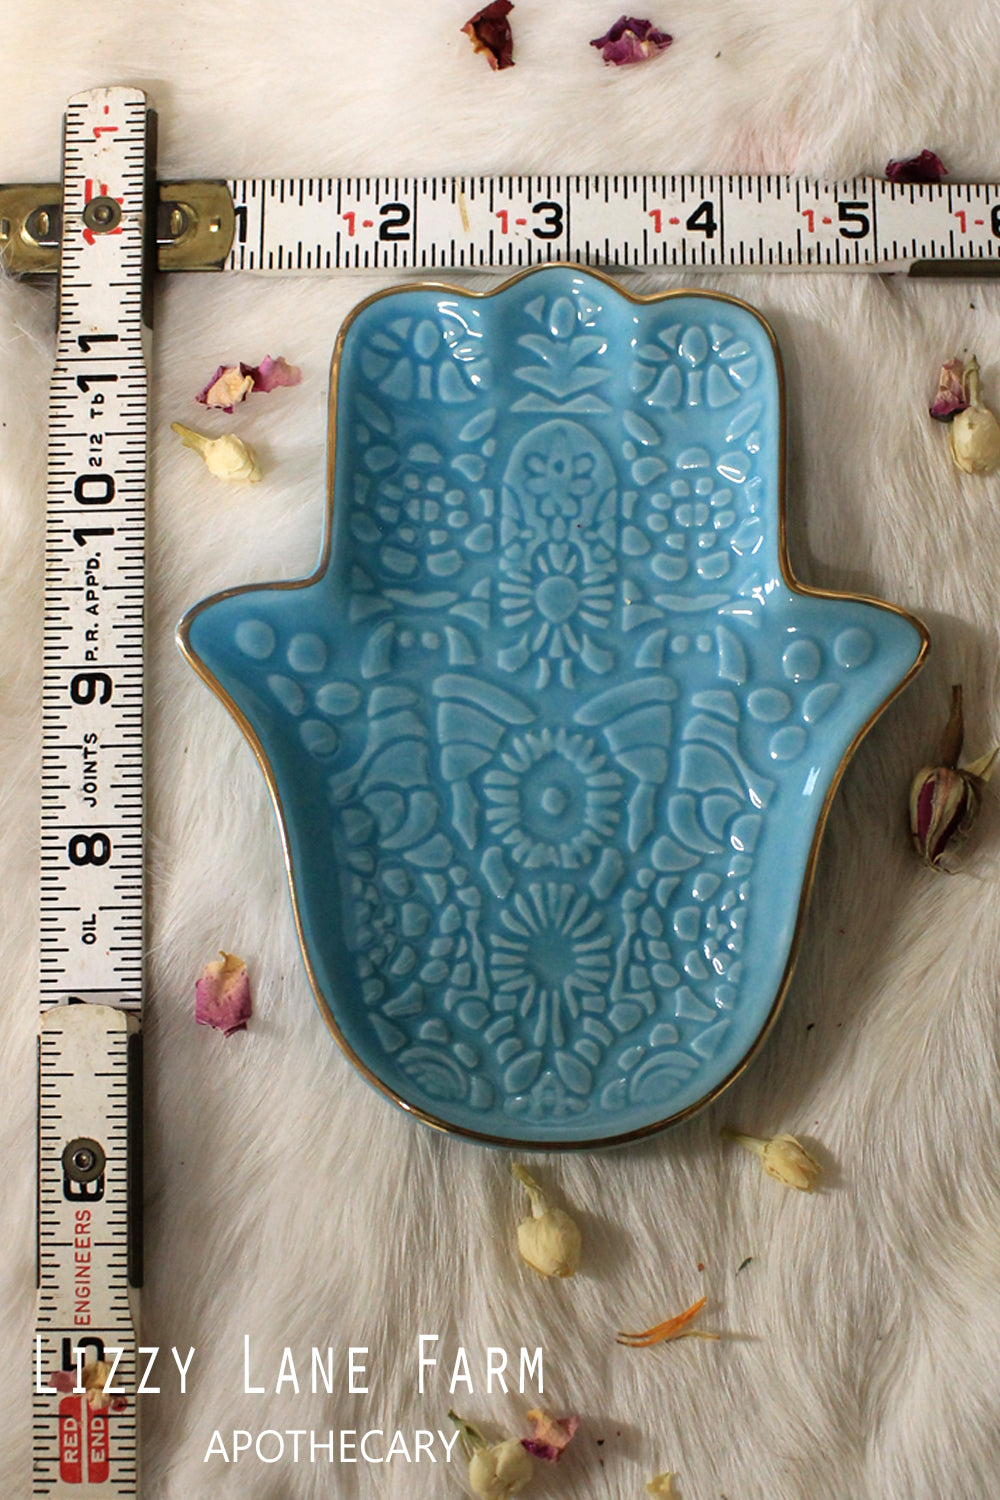 Hamsa Hand Smudge Dish Incense Burner | Brings it's owner happiness, luck, health, and good fortune.